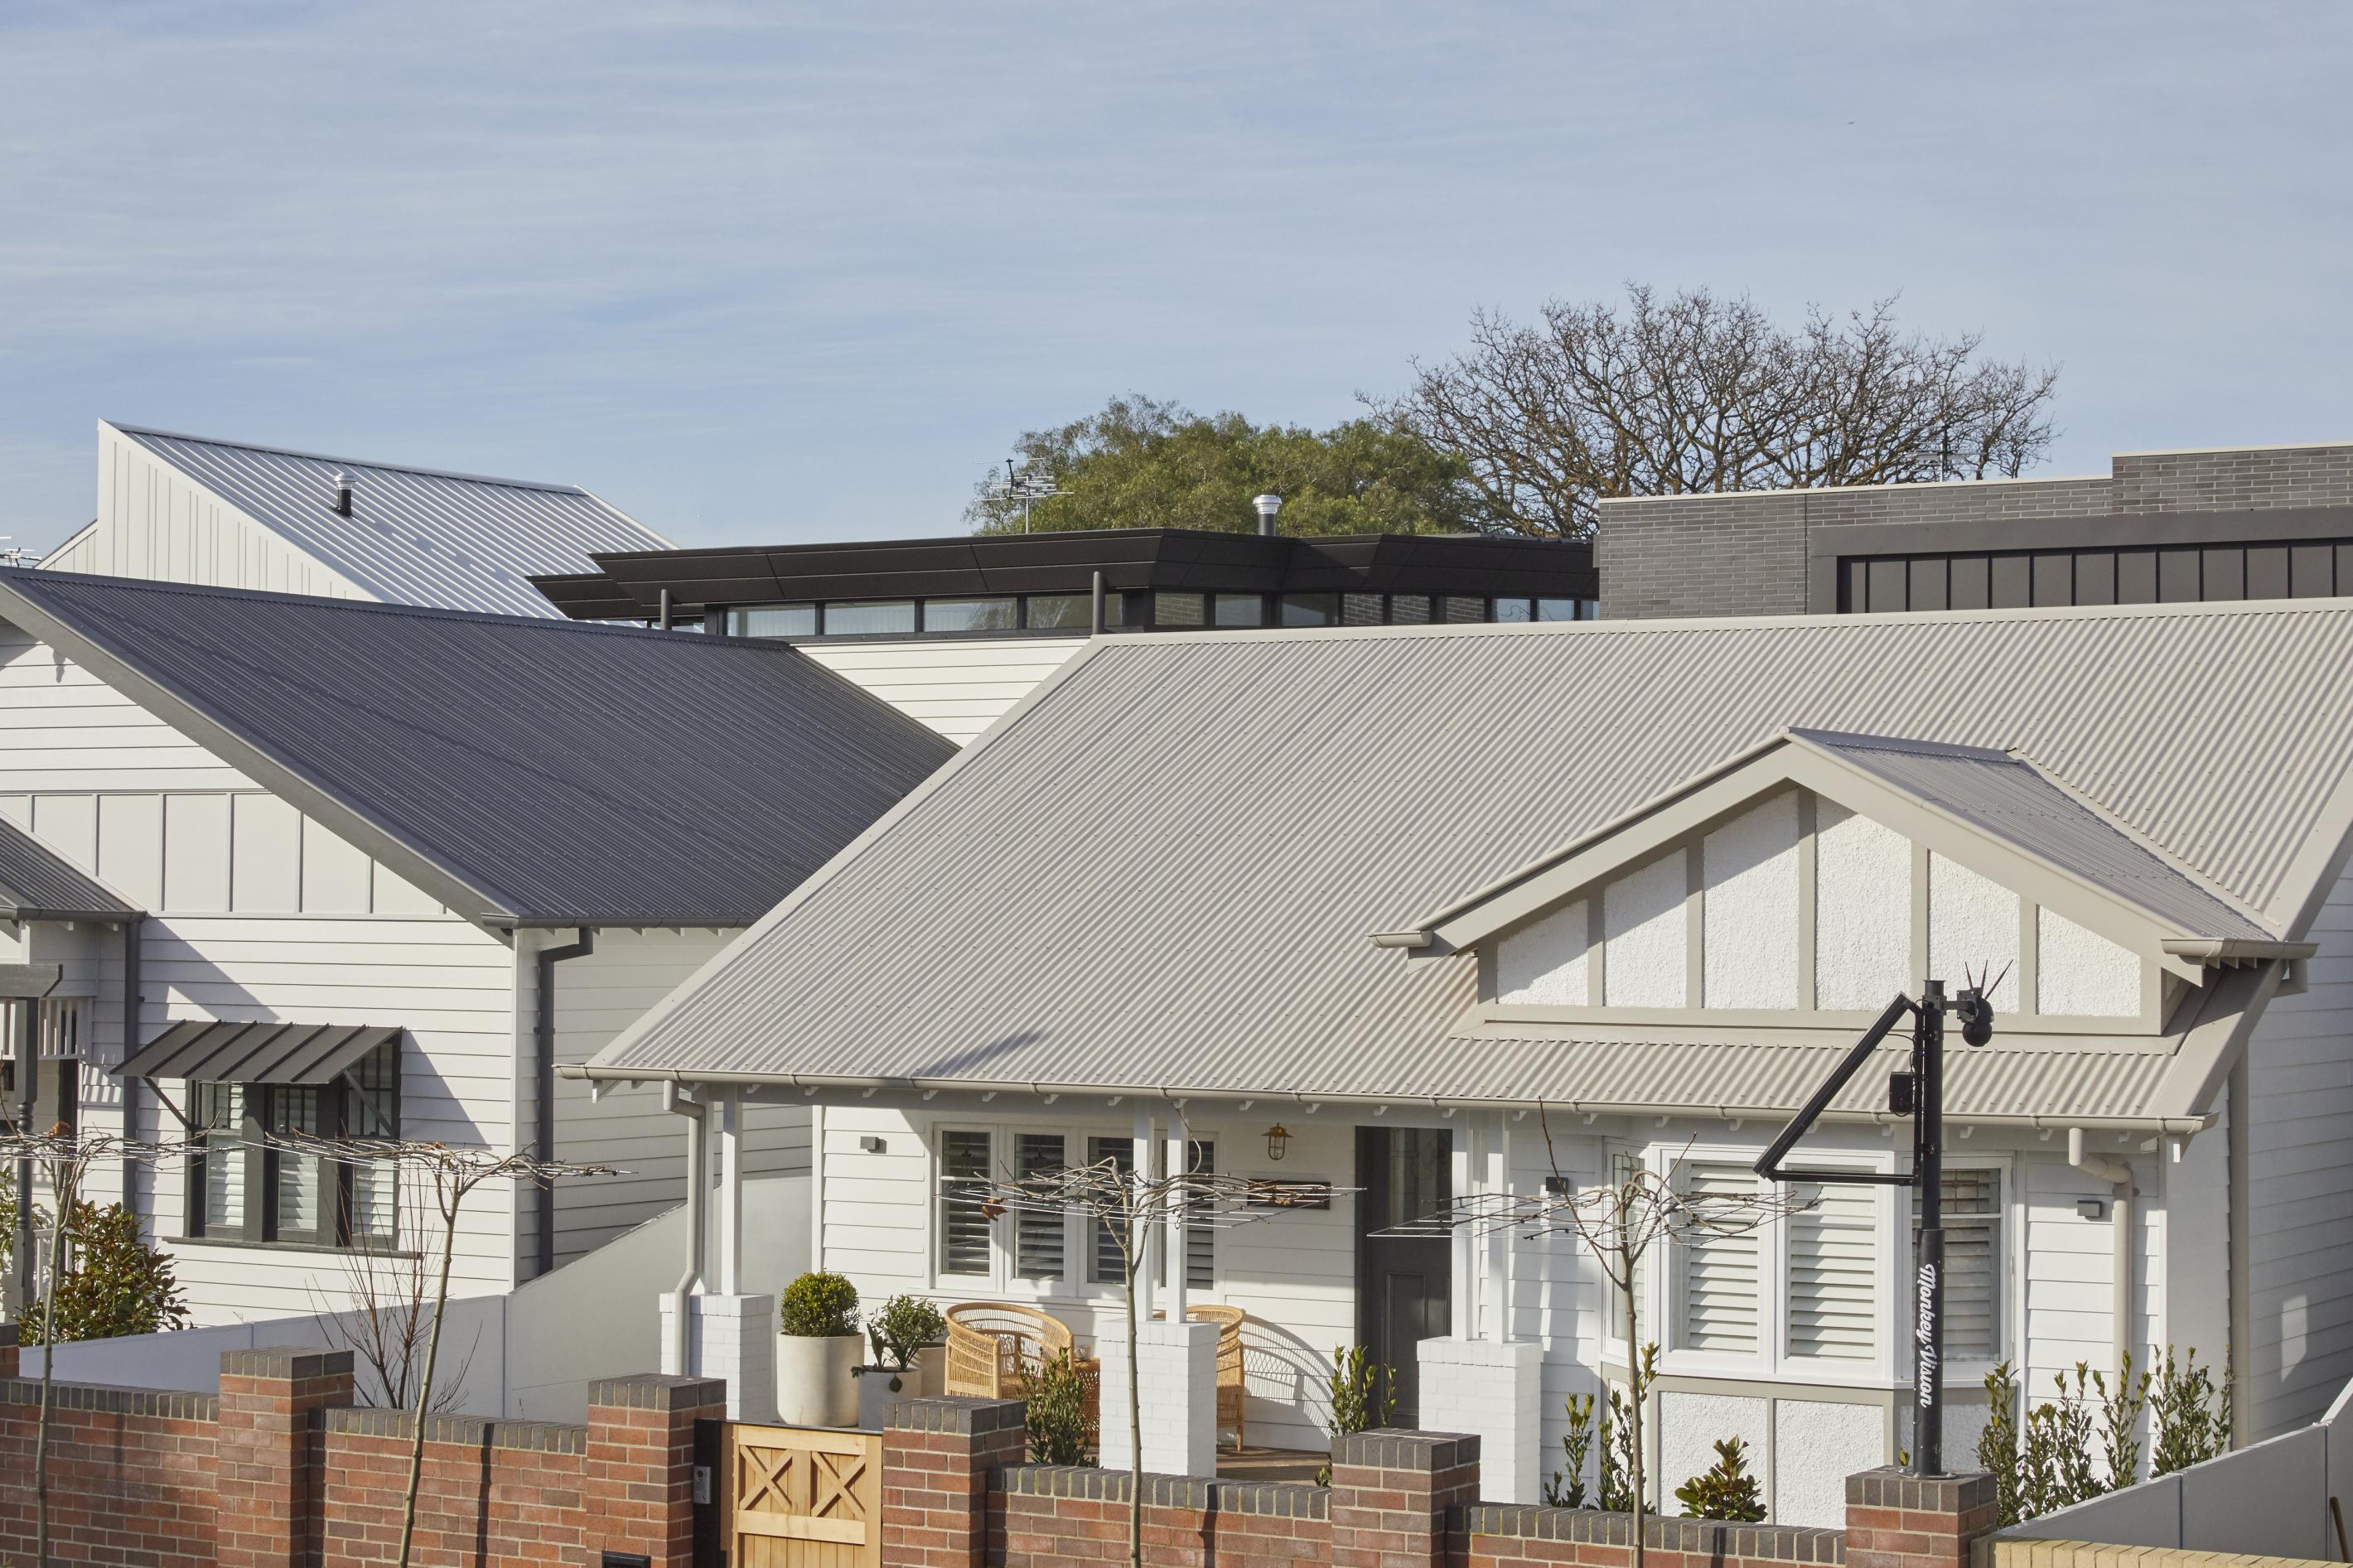 The Block 2020 roofing made from COLORBOND® steel.